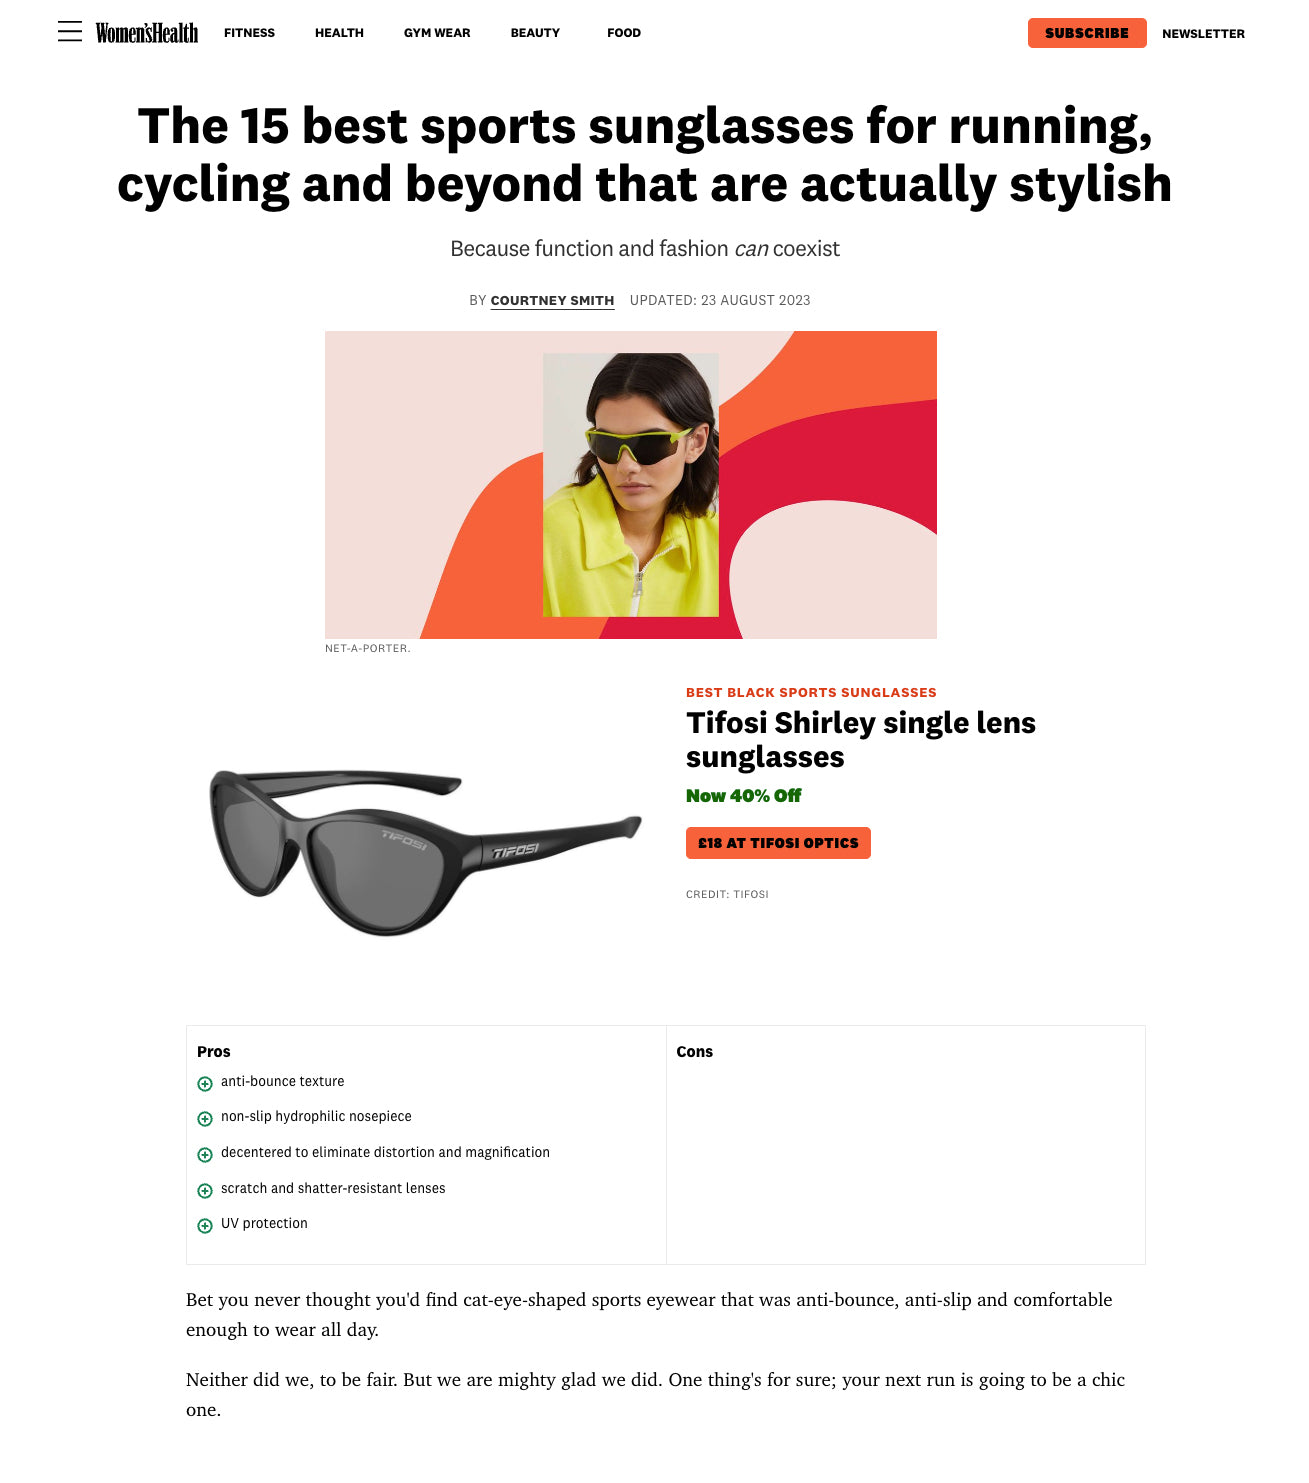 The 15 best sport sunglasses for running, cycling and beyond that are actually stylish